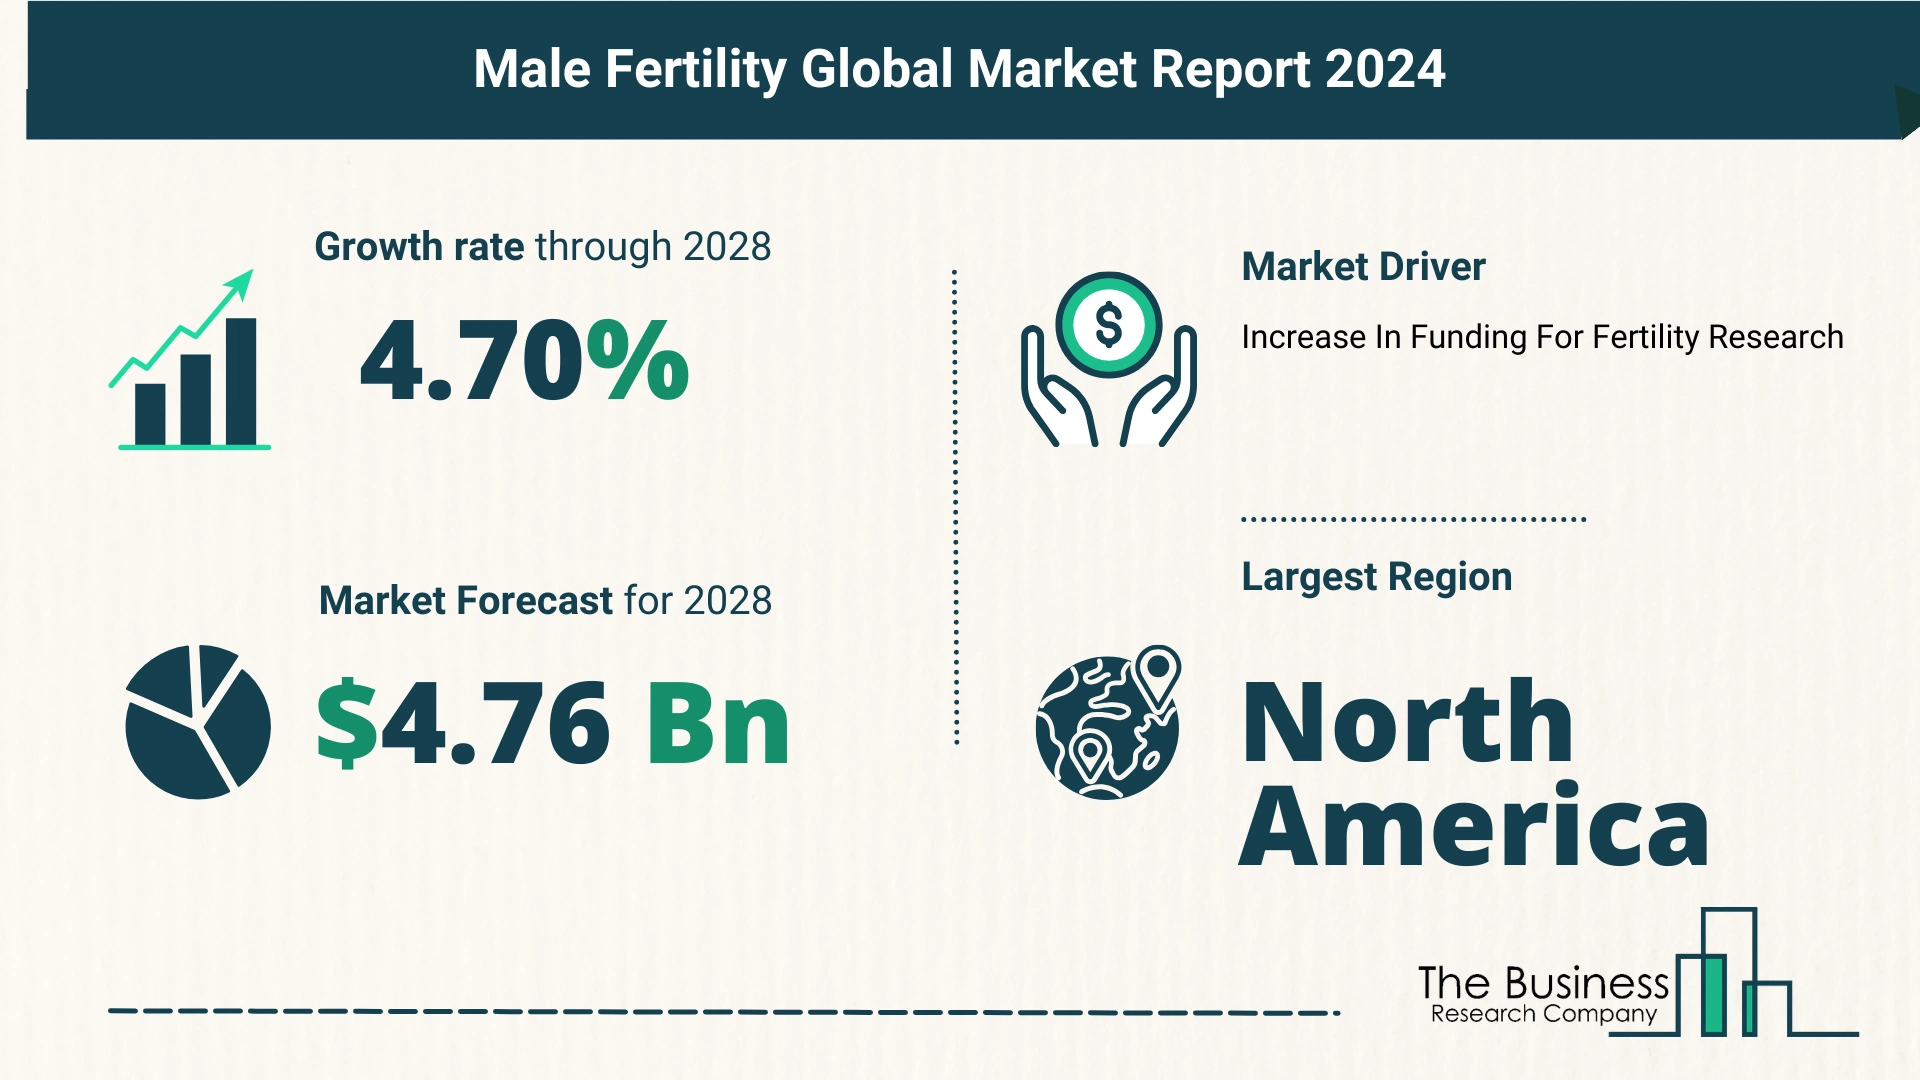 Global Male Fertility Market Analysis: Estimated Market Size And Growth Rate